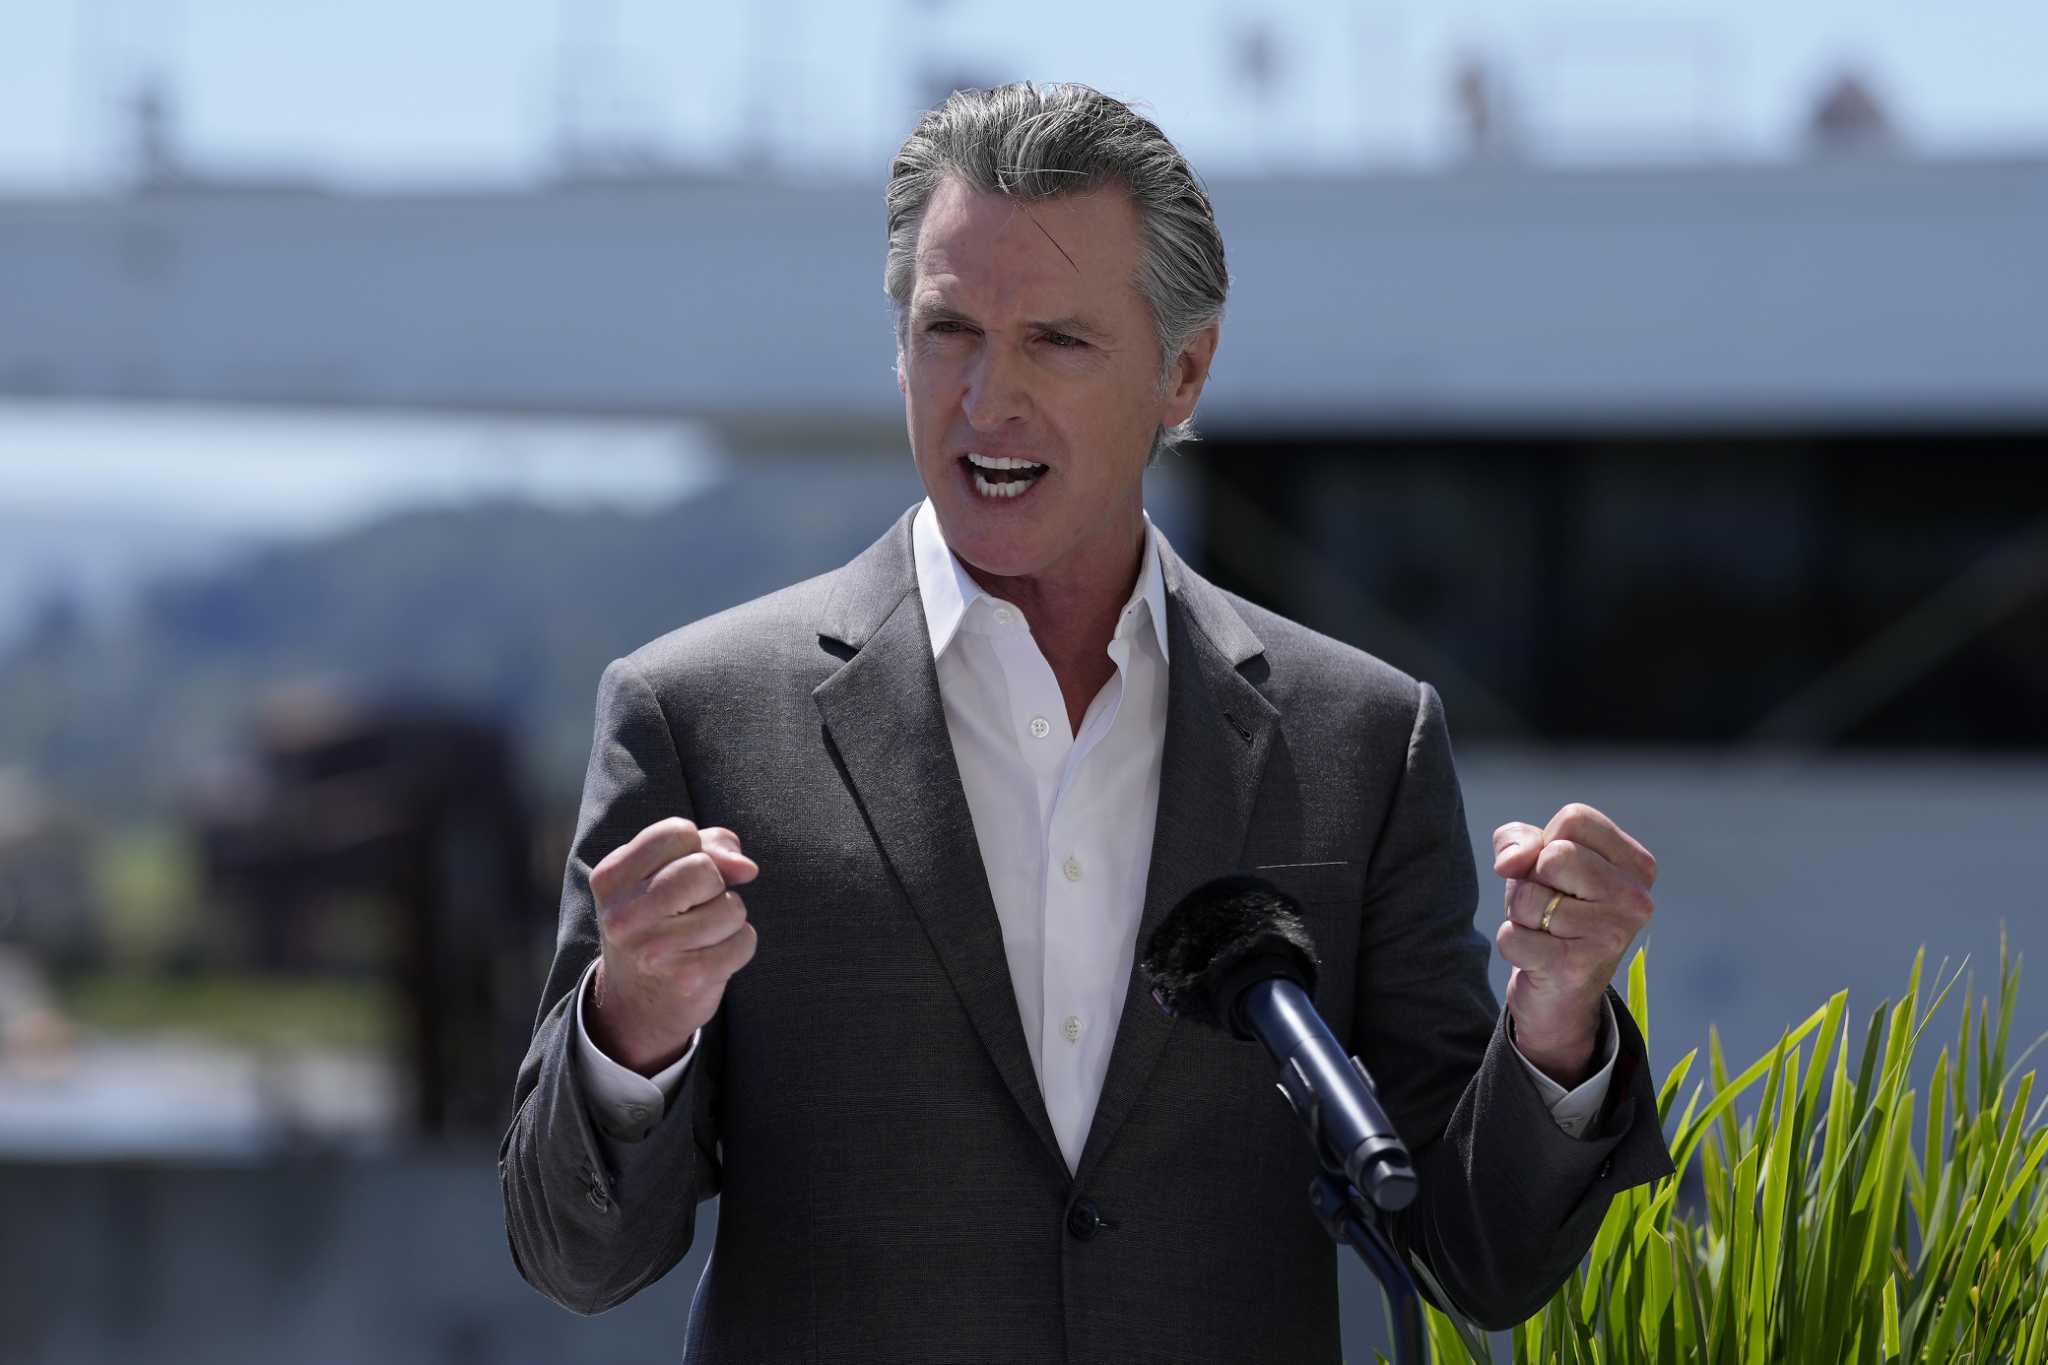 Newsom mentally leaves California and moves to the White House